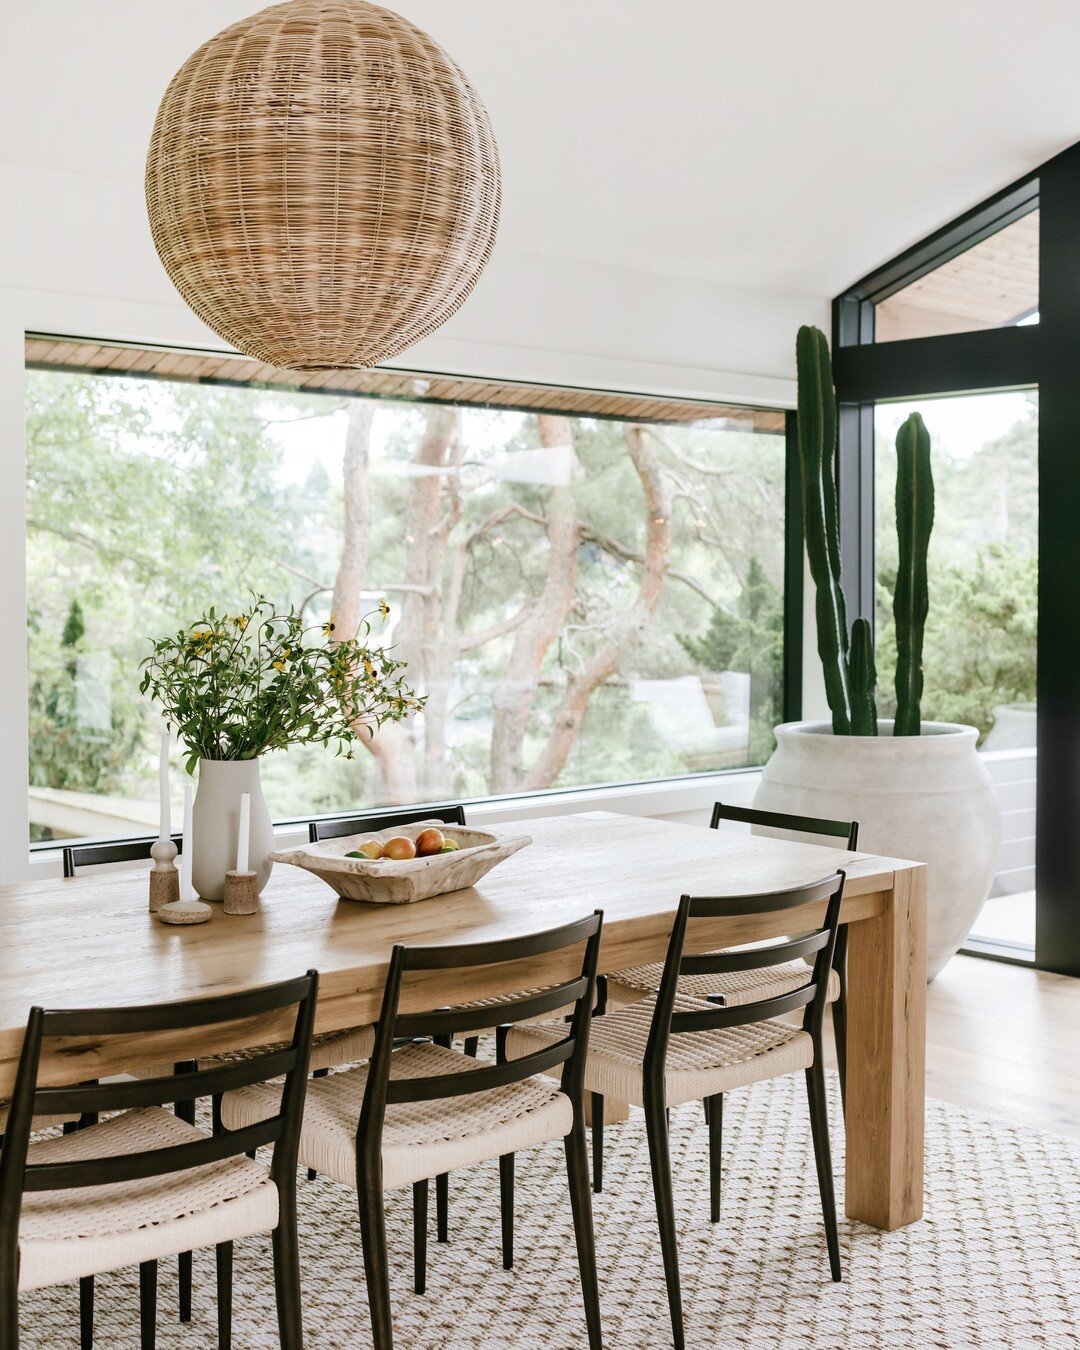 We are always looking for ways to bring in natural elements to a space. Whether that's with greenery, natural fibers, or just using the landscape as your artwork, its often these elements that ground a home the most 💚